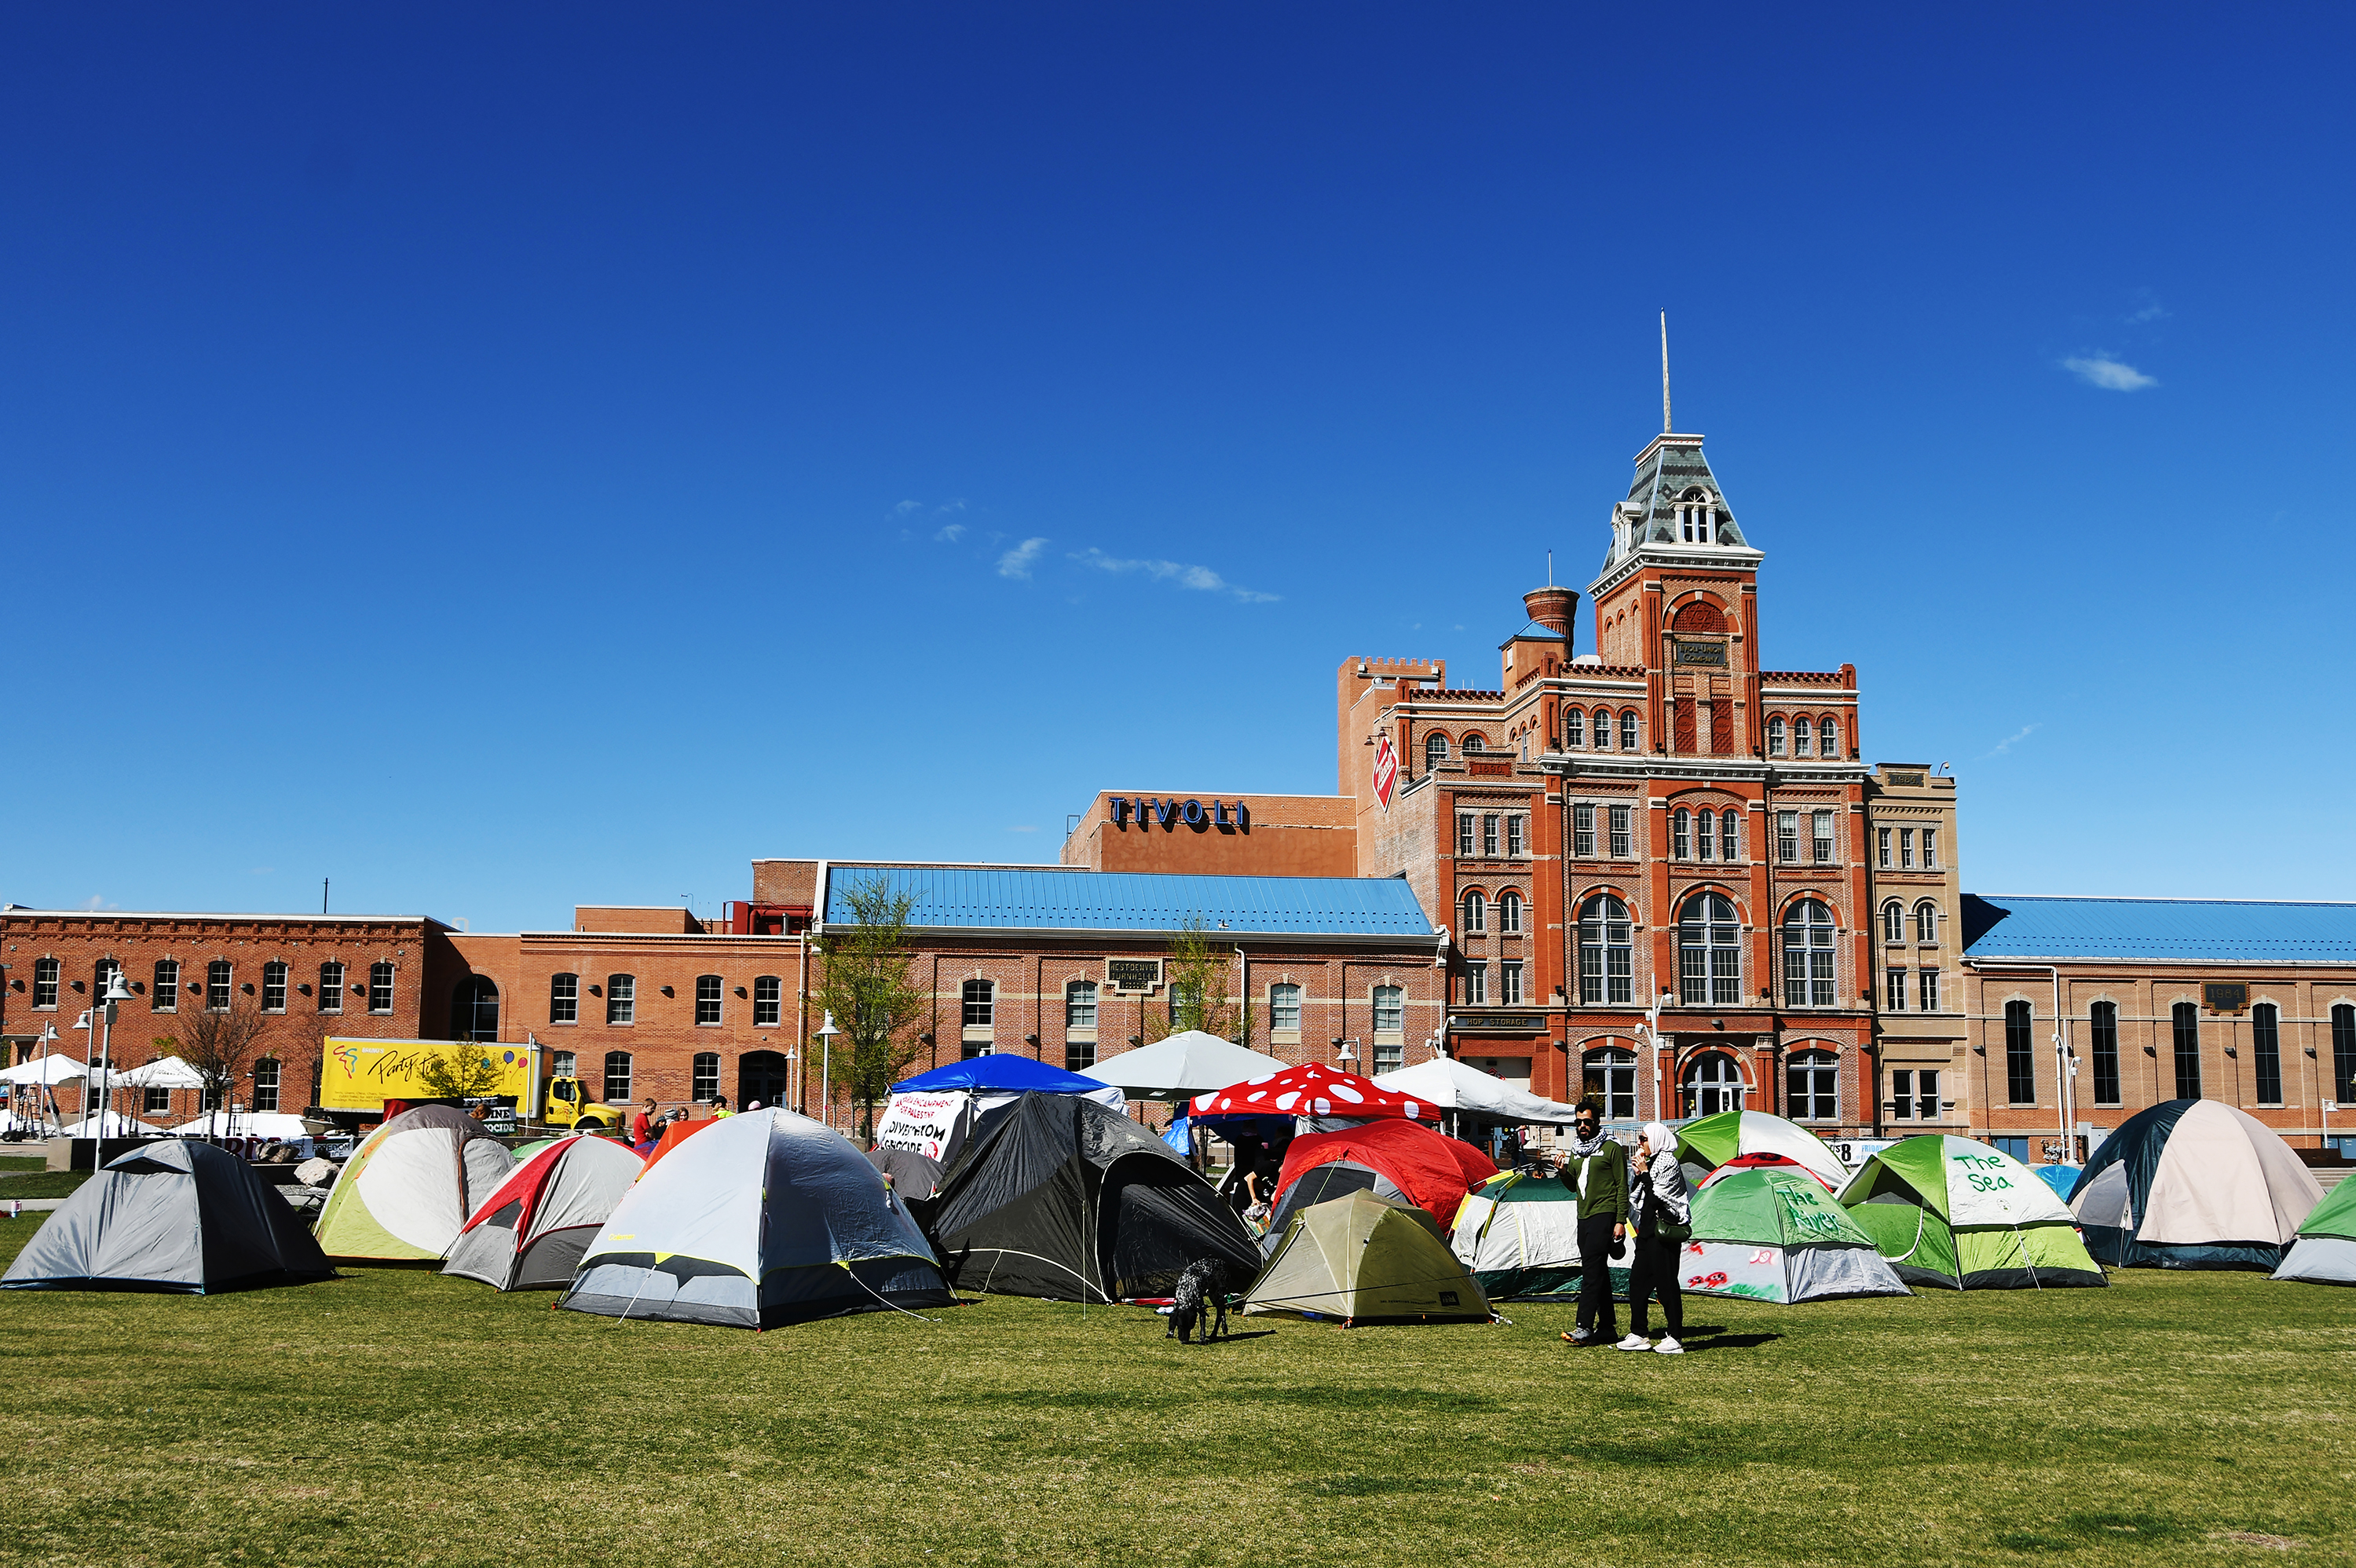 Pro-Palestinian demonstrators set up about 30 tents for their rally. "sit-in" On April 26, a protest against the war in Gaza took place at the Auraria campus in Denver, Colorado.